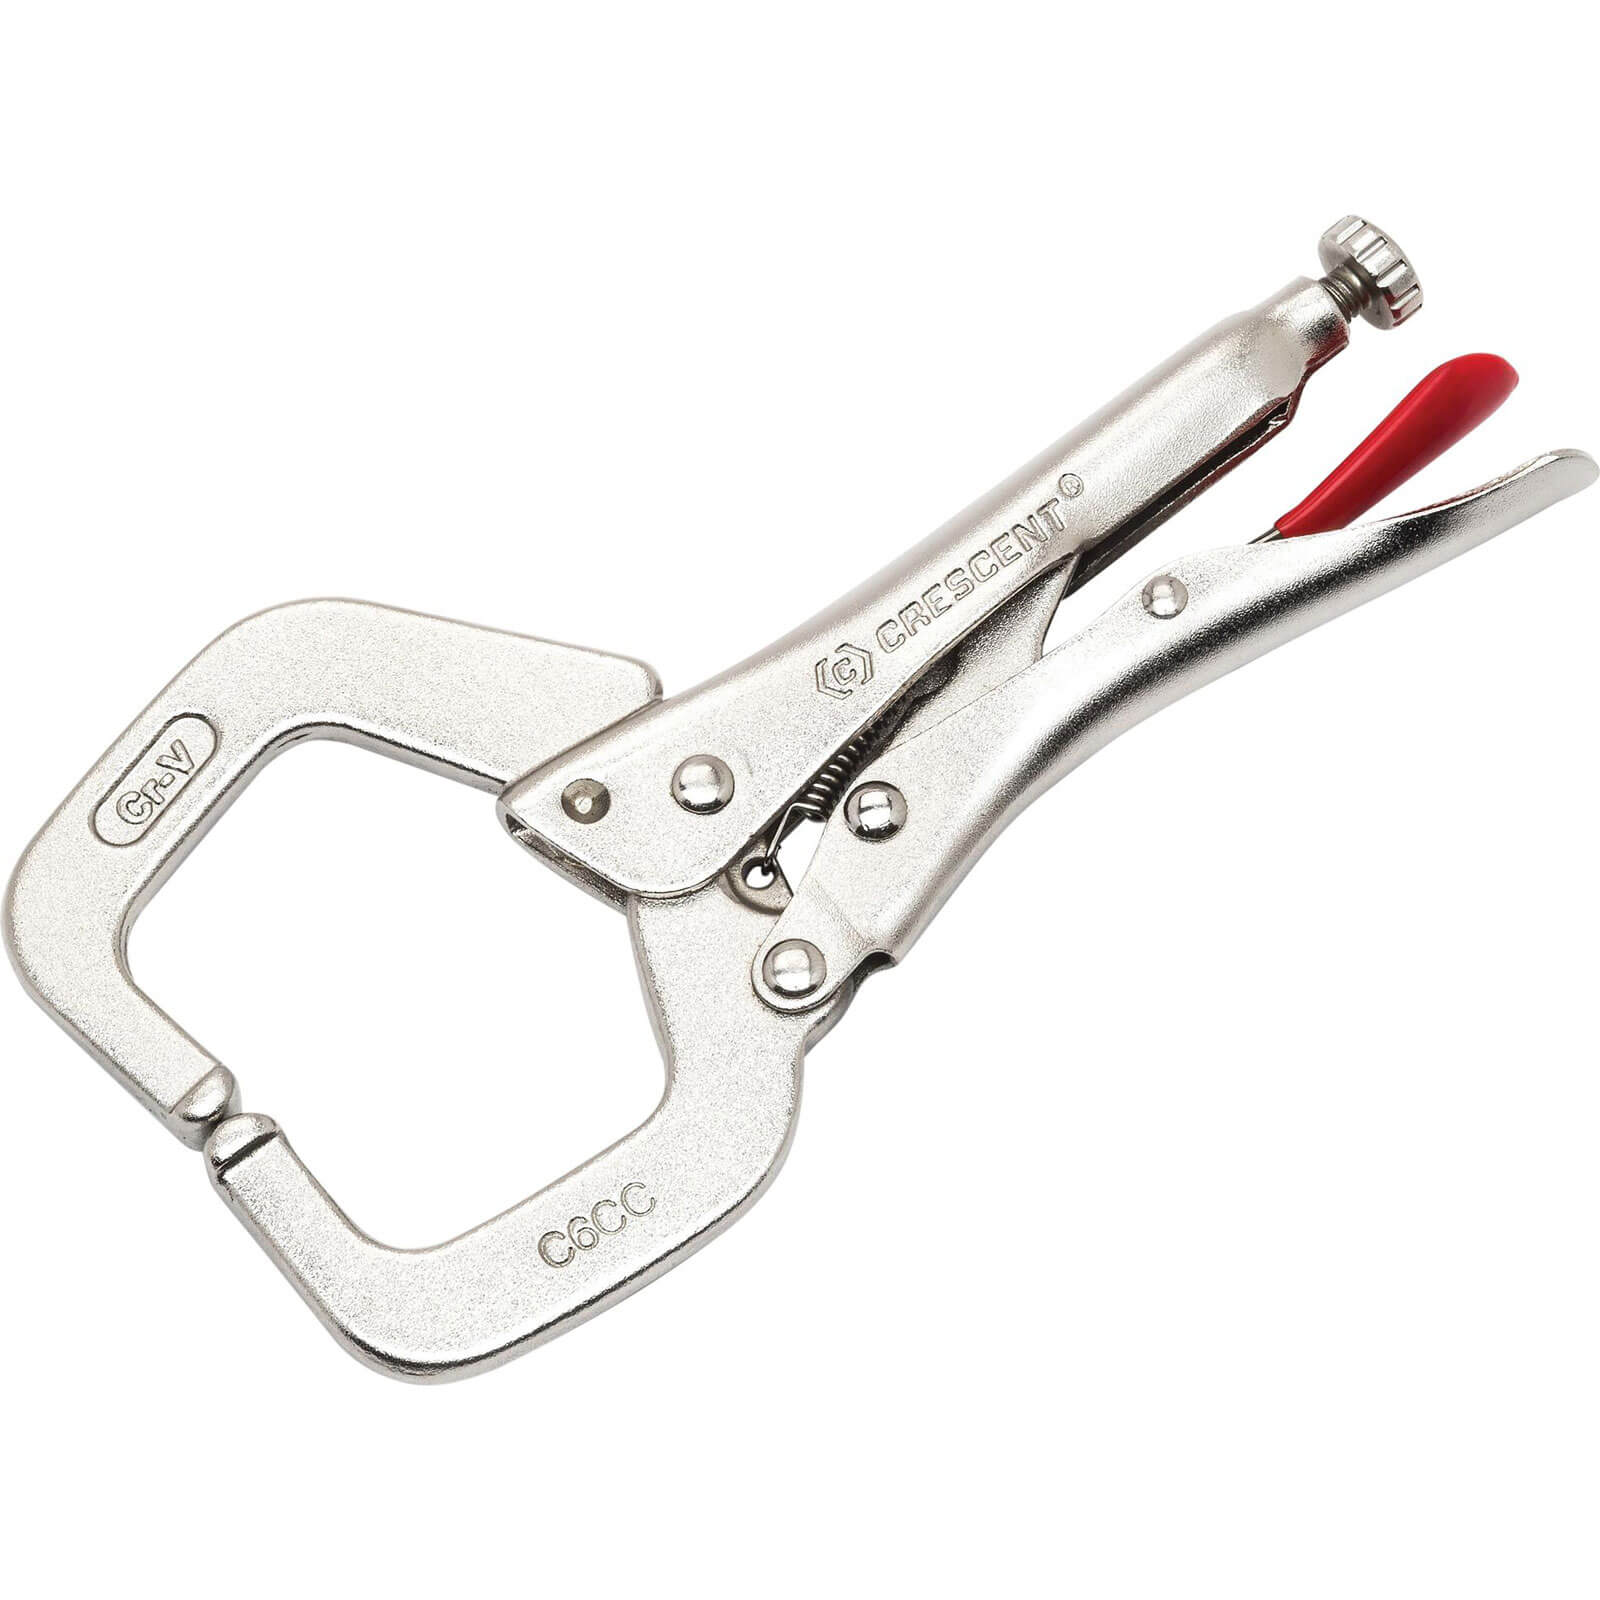 Photo of Crescent Locking C-clamp With Swivel Pads 54mm